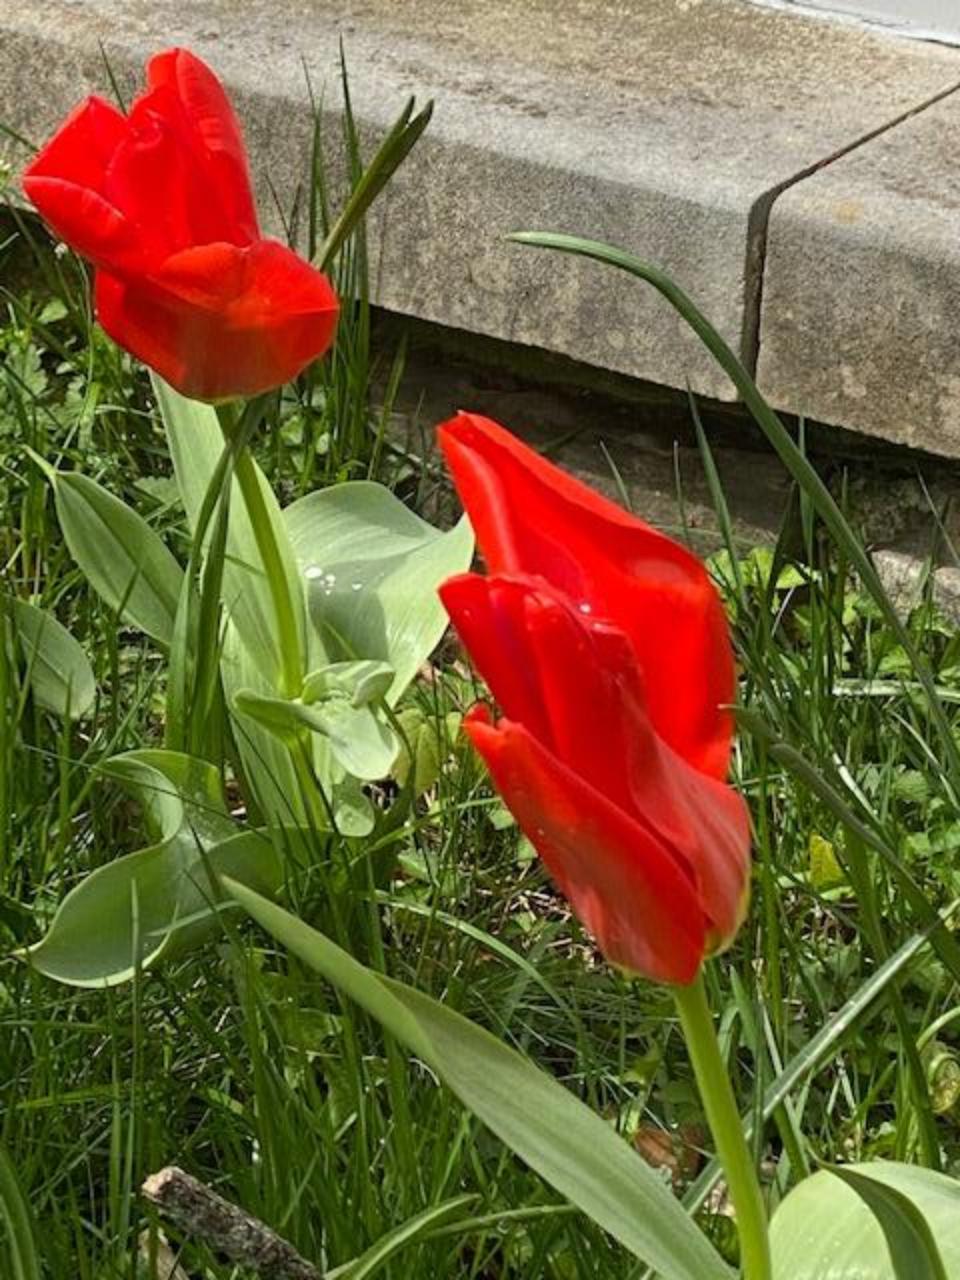 Blooming tulips in New Jersey